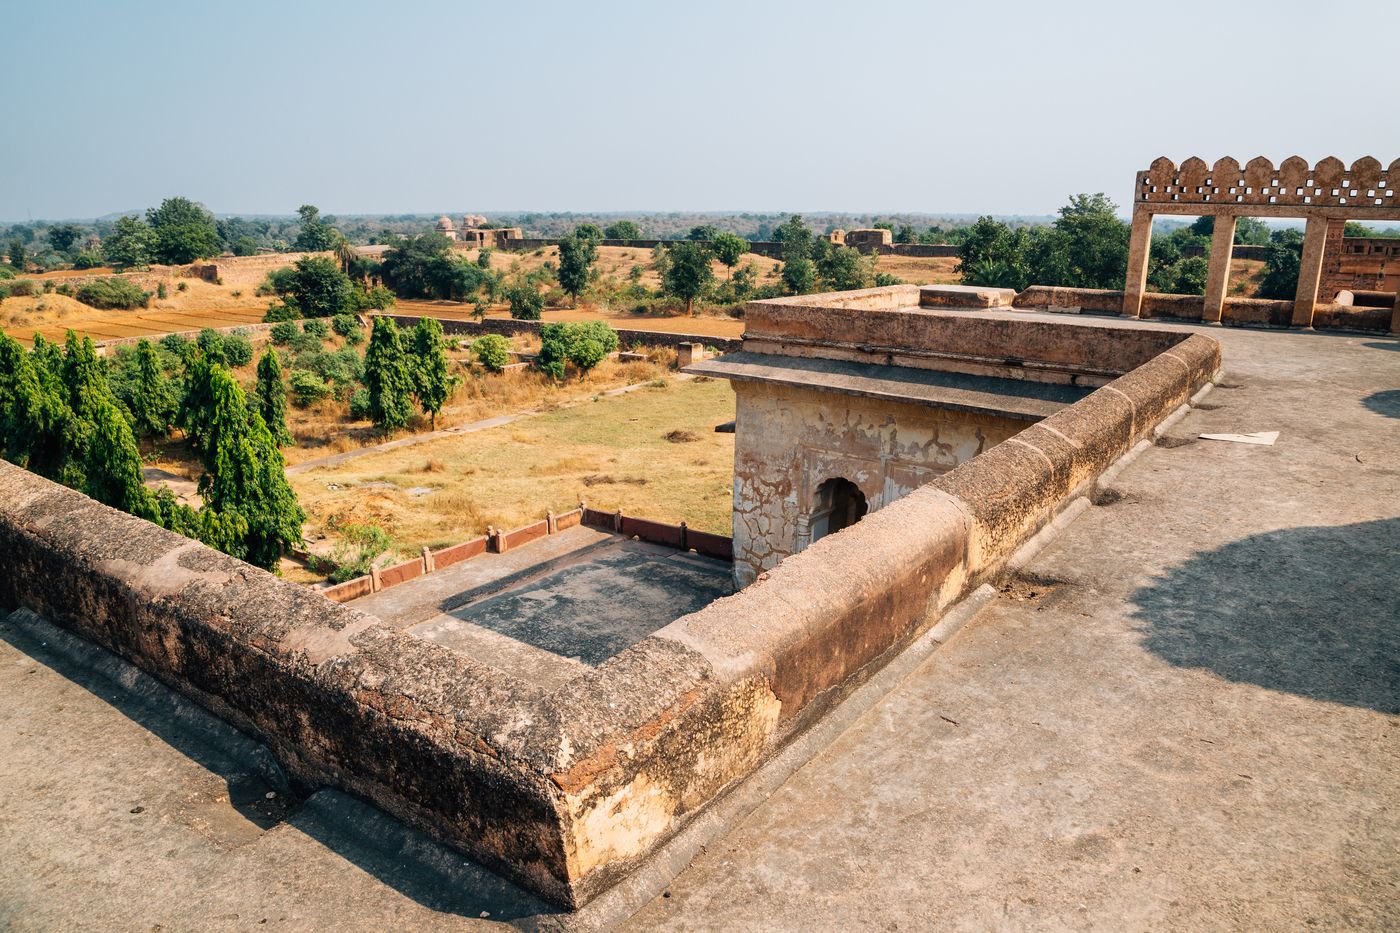 The magnificent ruins of the palace in Orchha, dedicated to Rai Parveen, known as the Nightingale of Orchha, overlooking the garden 